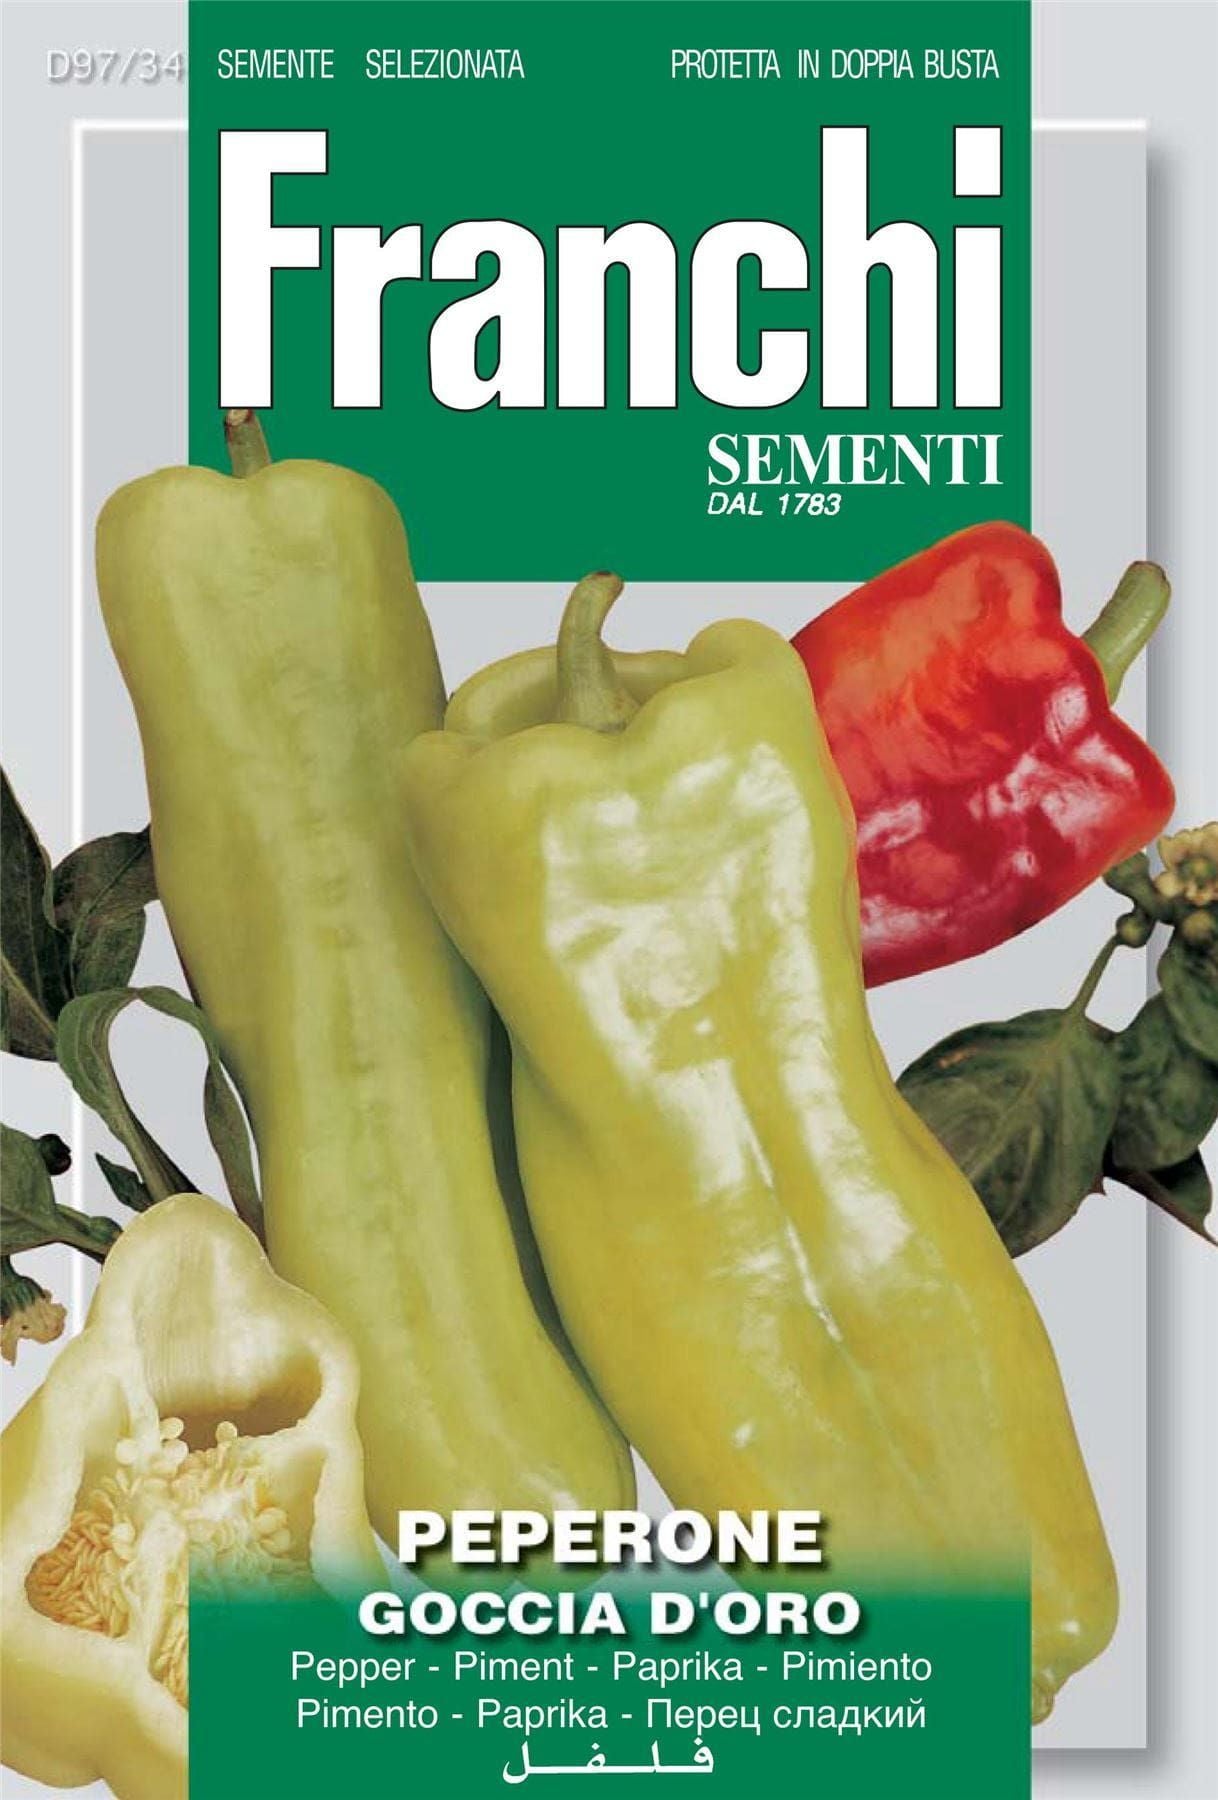 Franchi Seeds of Italy - DBO 97/34 - Pepper - Goccia D'Oro - Seeds